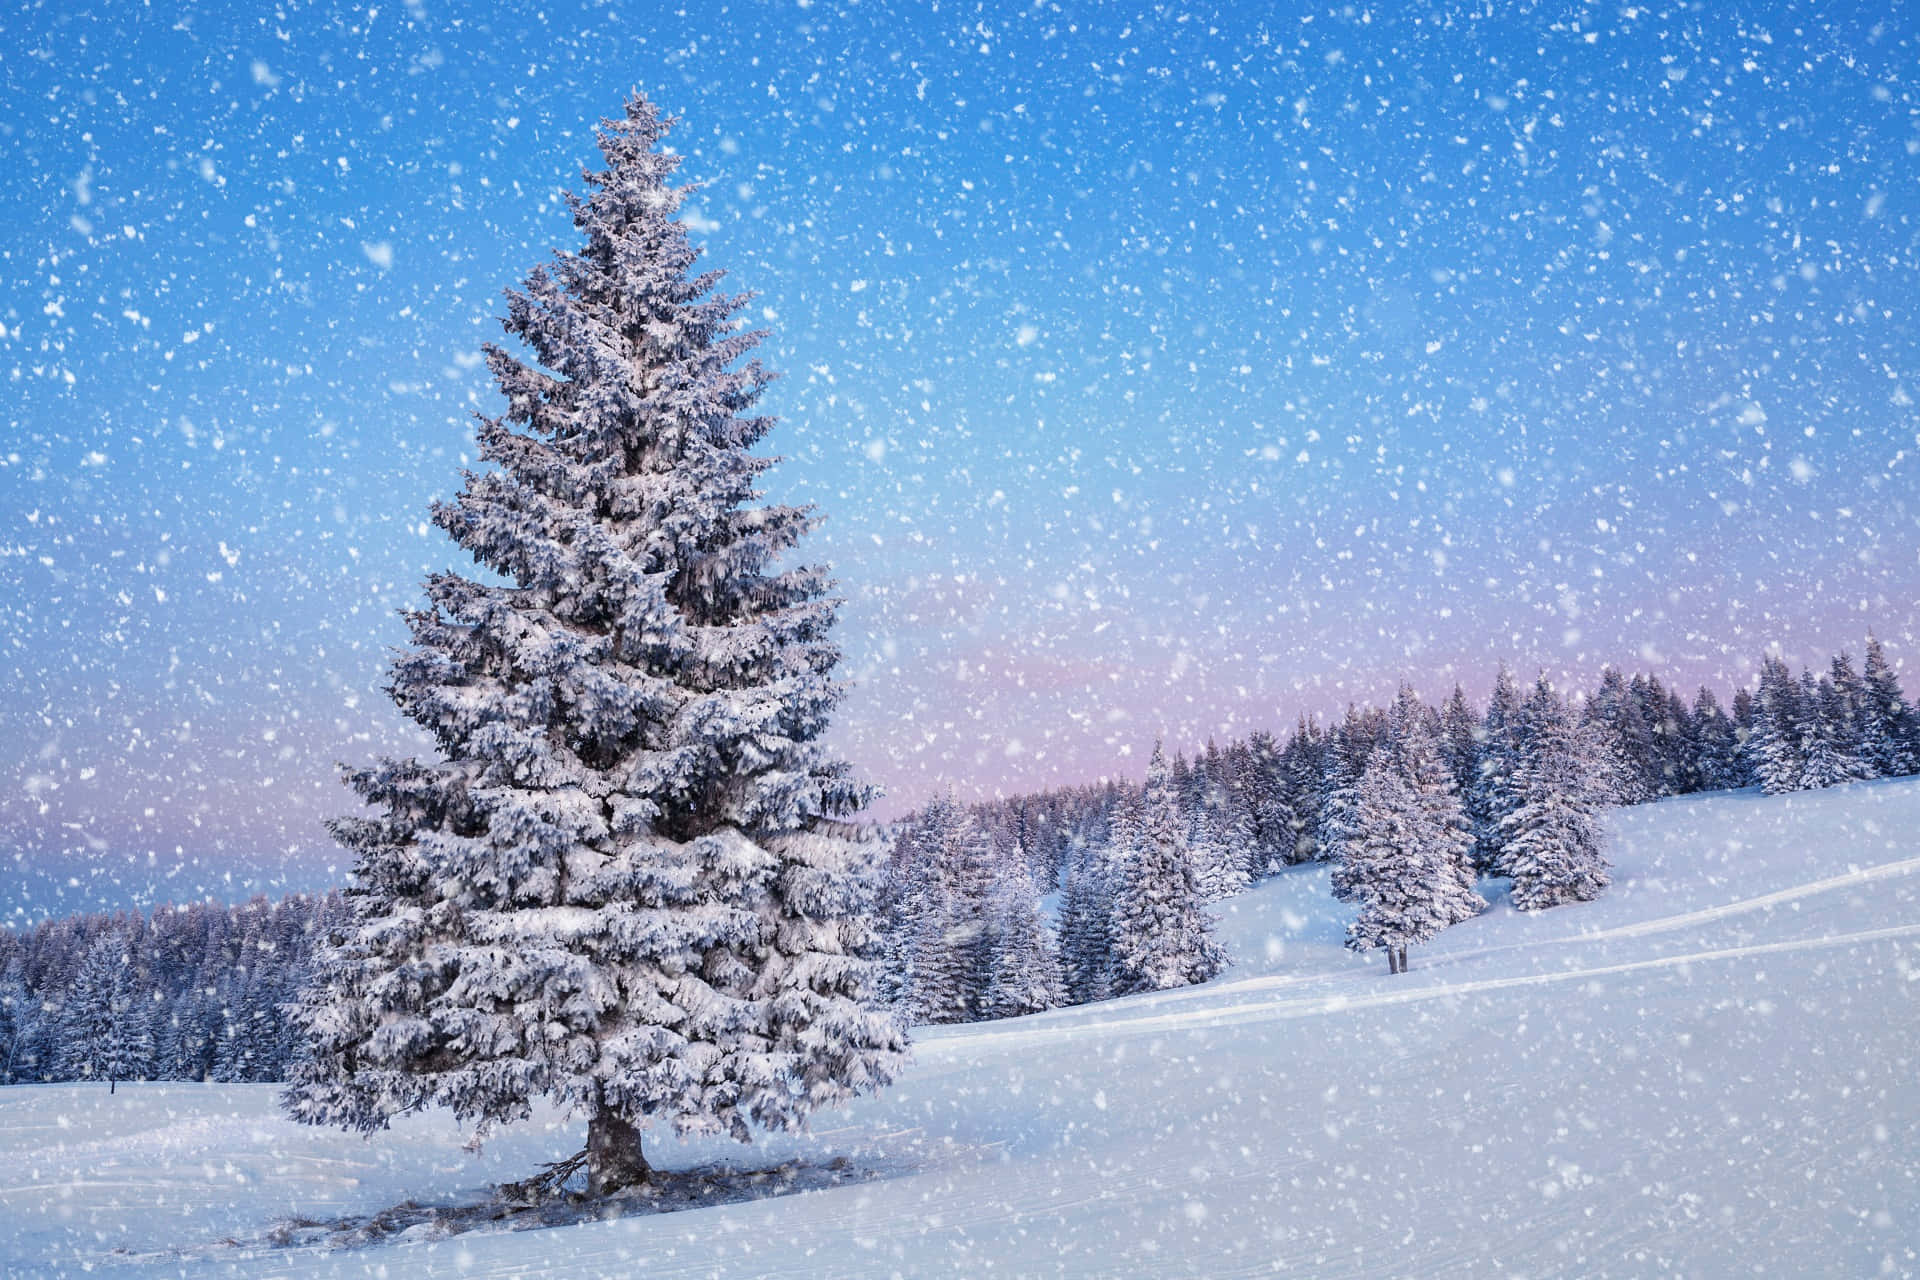 Snow Falling Backgrounds